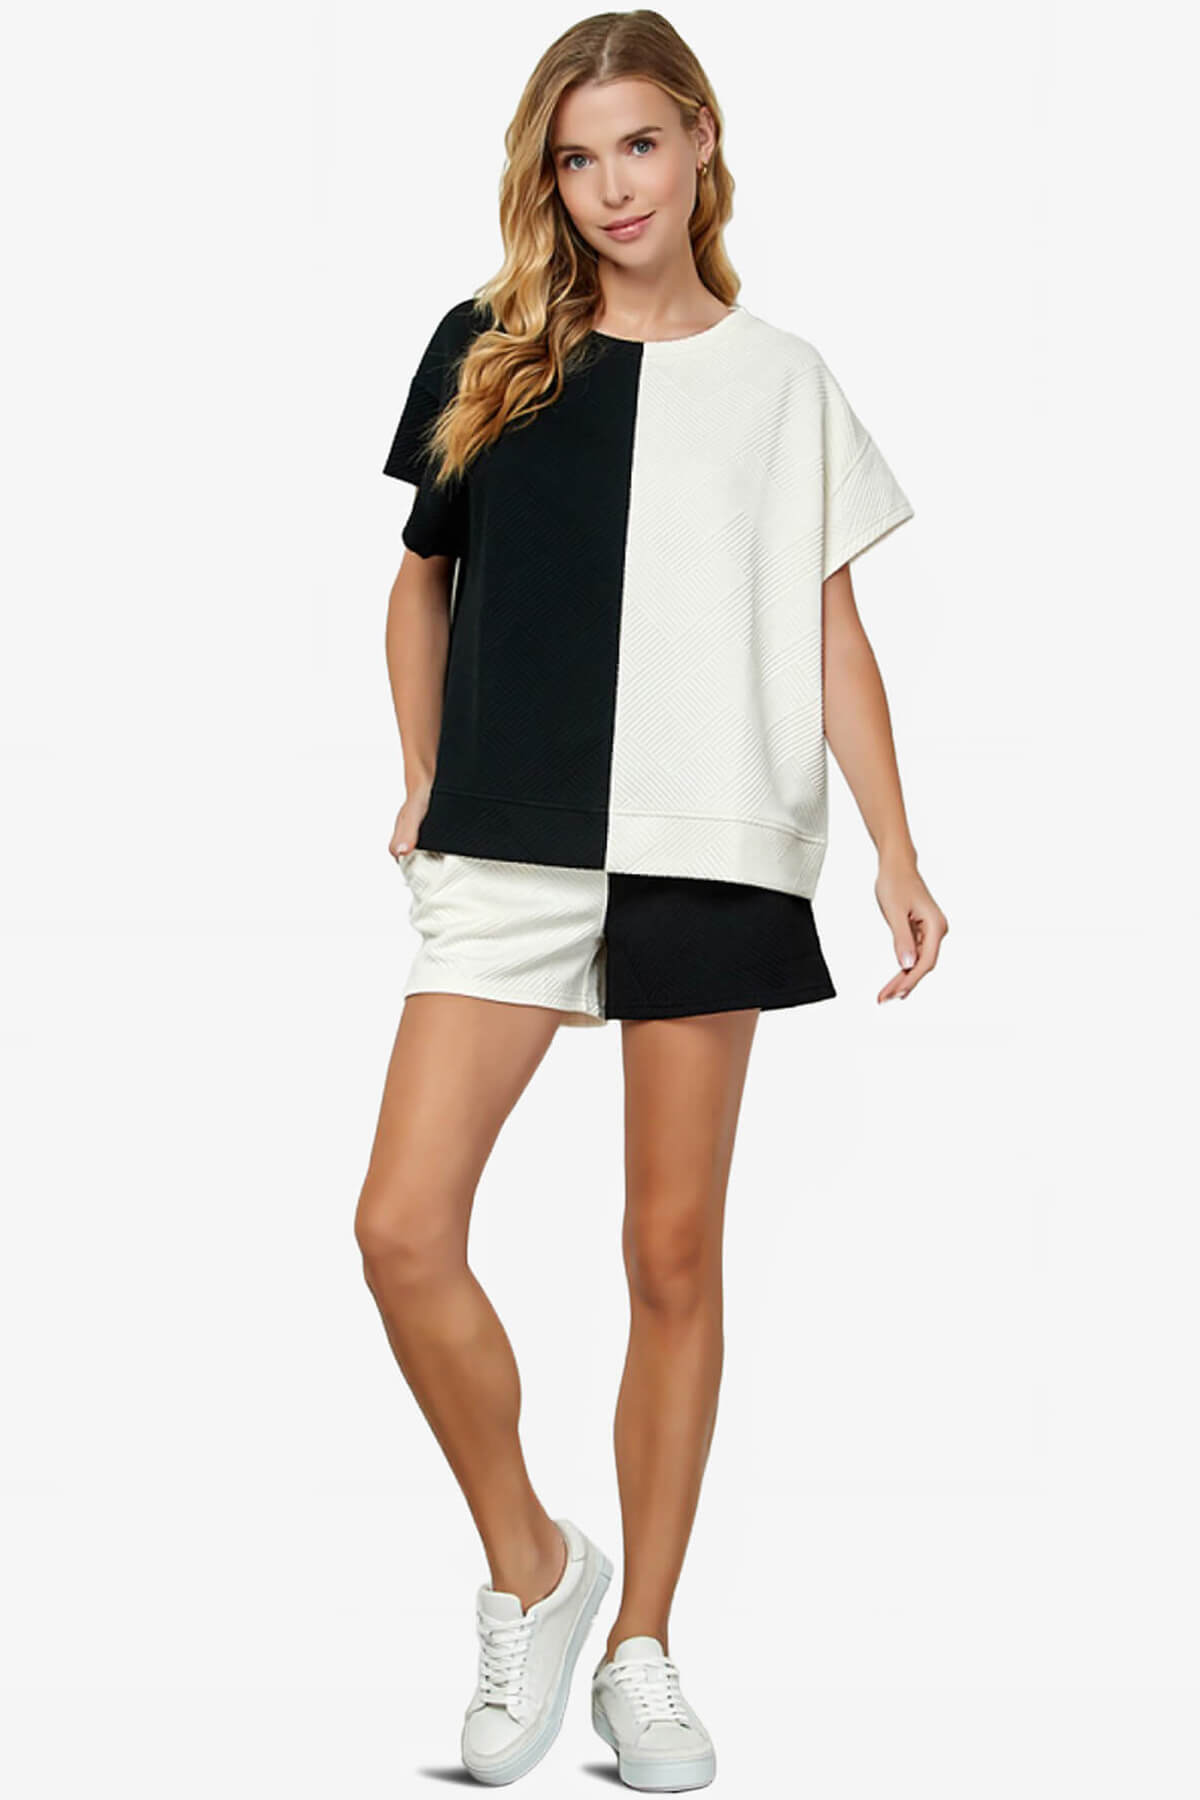 Lassy Textured Colorblock Short Sleeve Top BLACK AND WHITE_5